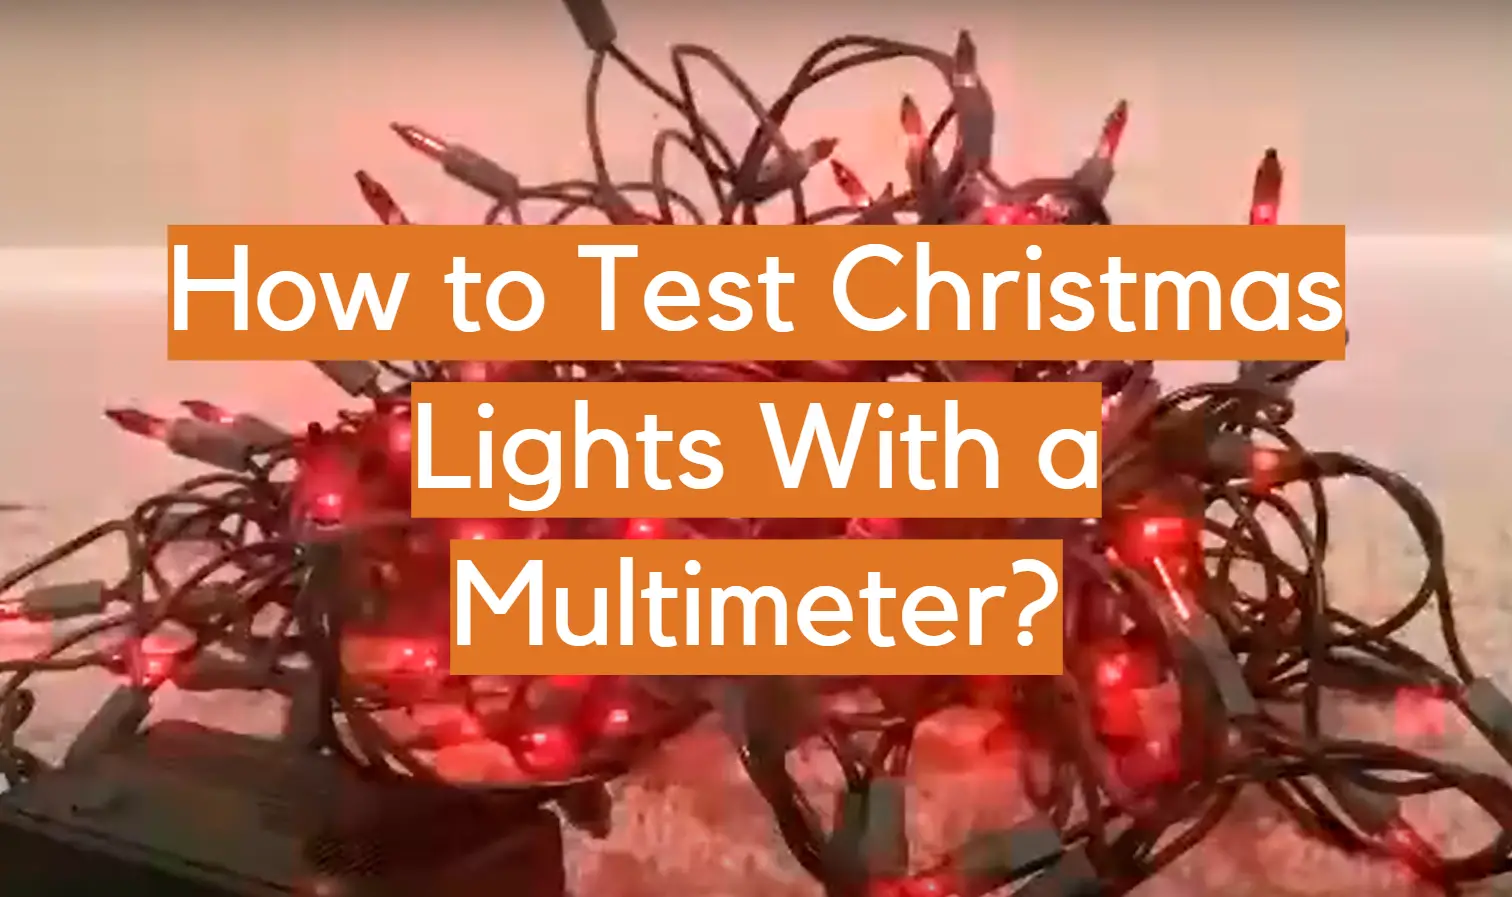 How to Test Christmas Lights With a Multimeter?